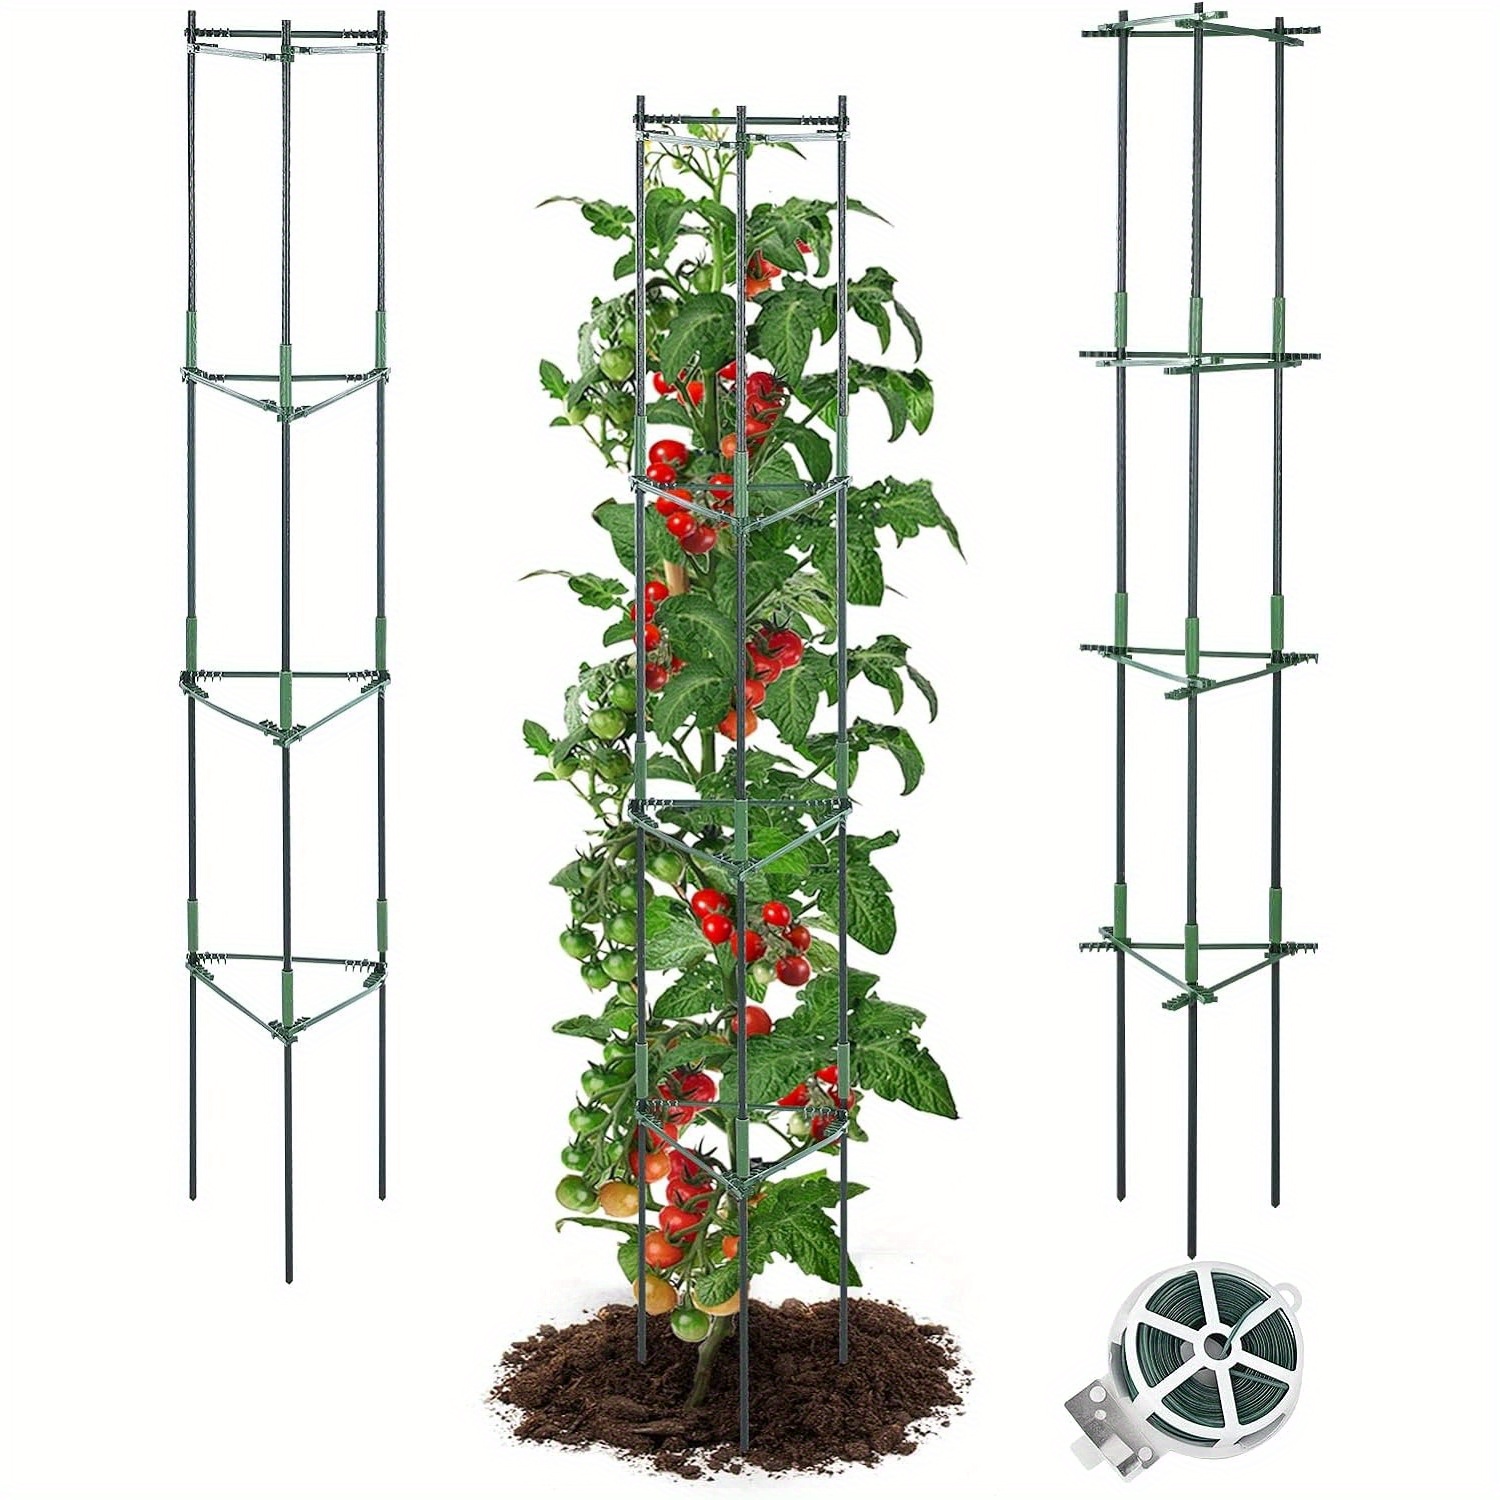 

3 Packs 74 Inches Tomato Cages For Garden, Premium Tomato Plant Cage For Pots, Tomato Trellis Plant Stakes Supports With 164ft Twist Tie, For Vegetable Flowers Fruits Vertical Climbing Plants